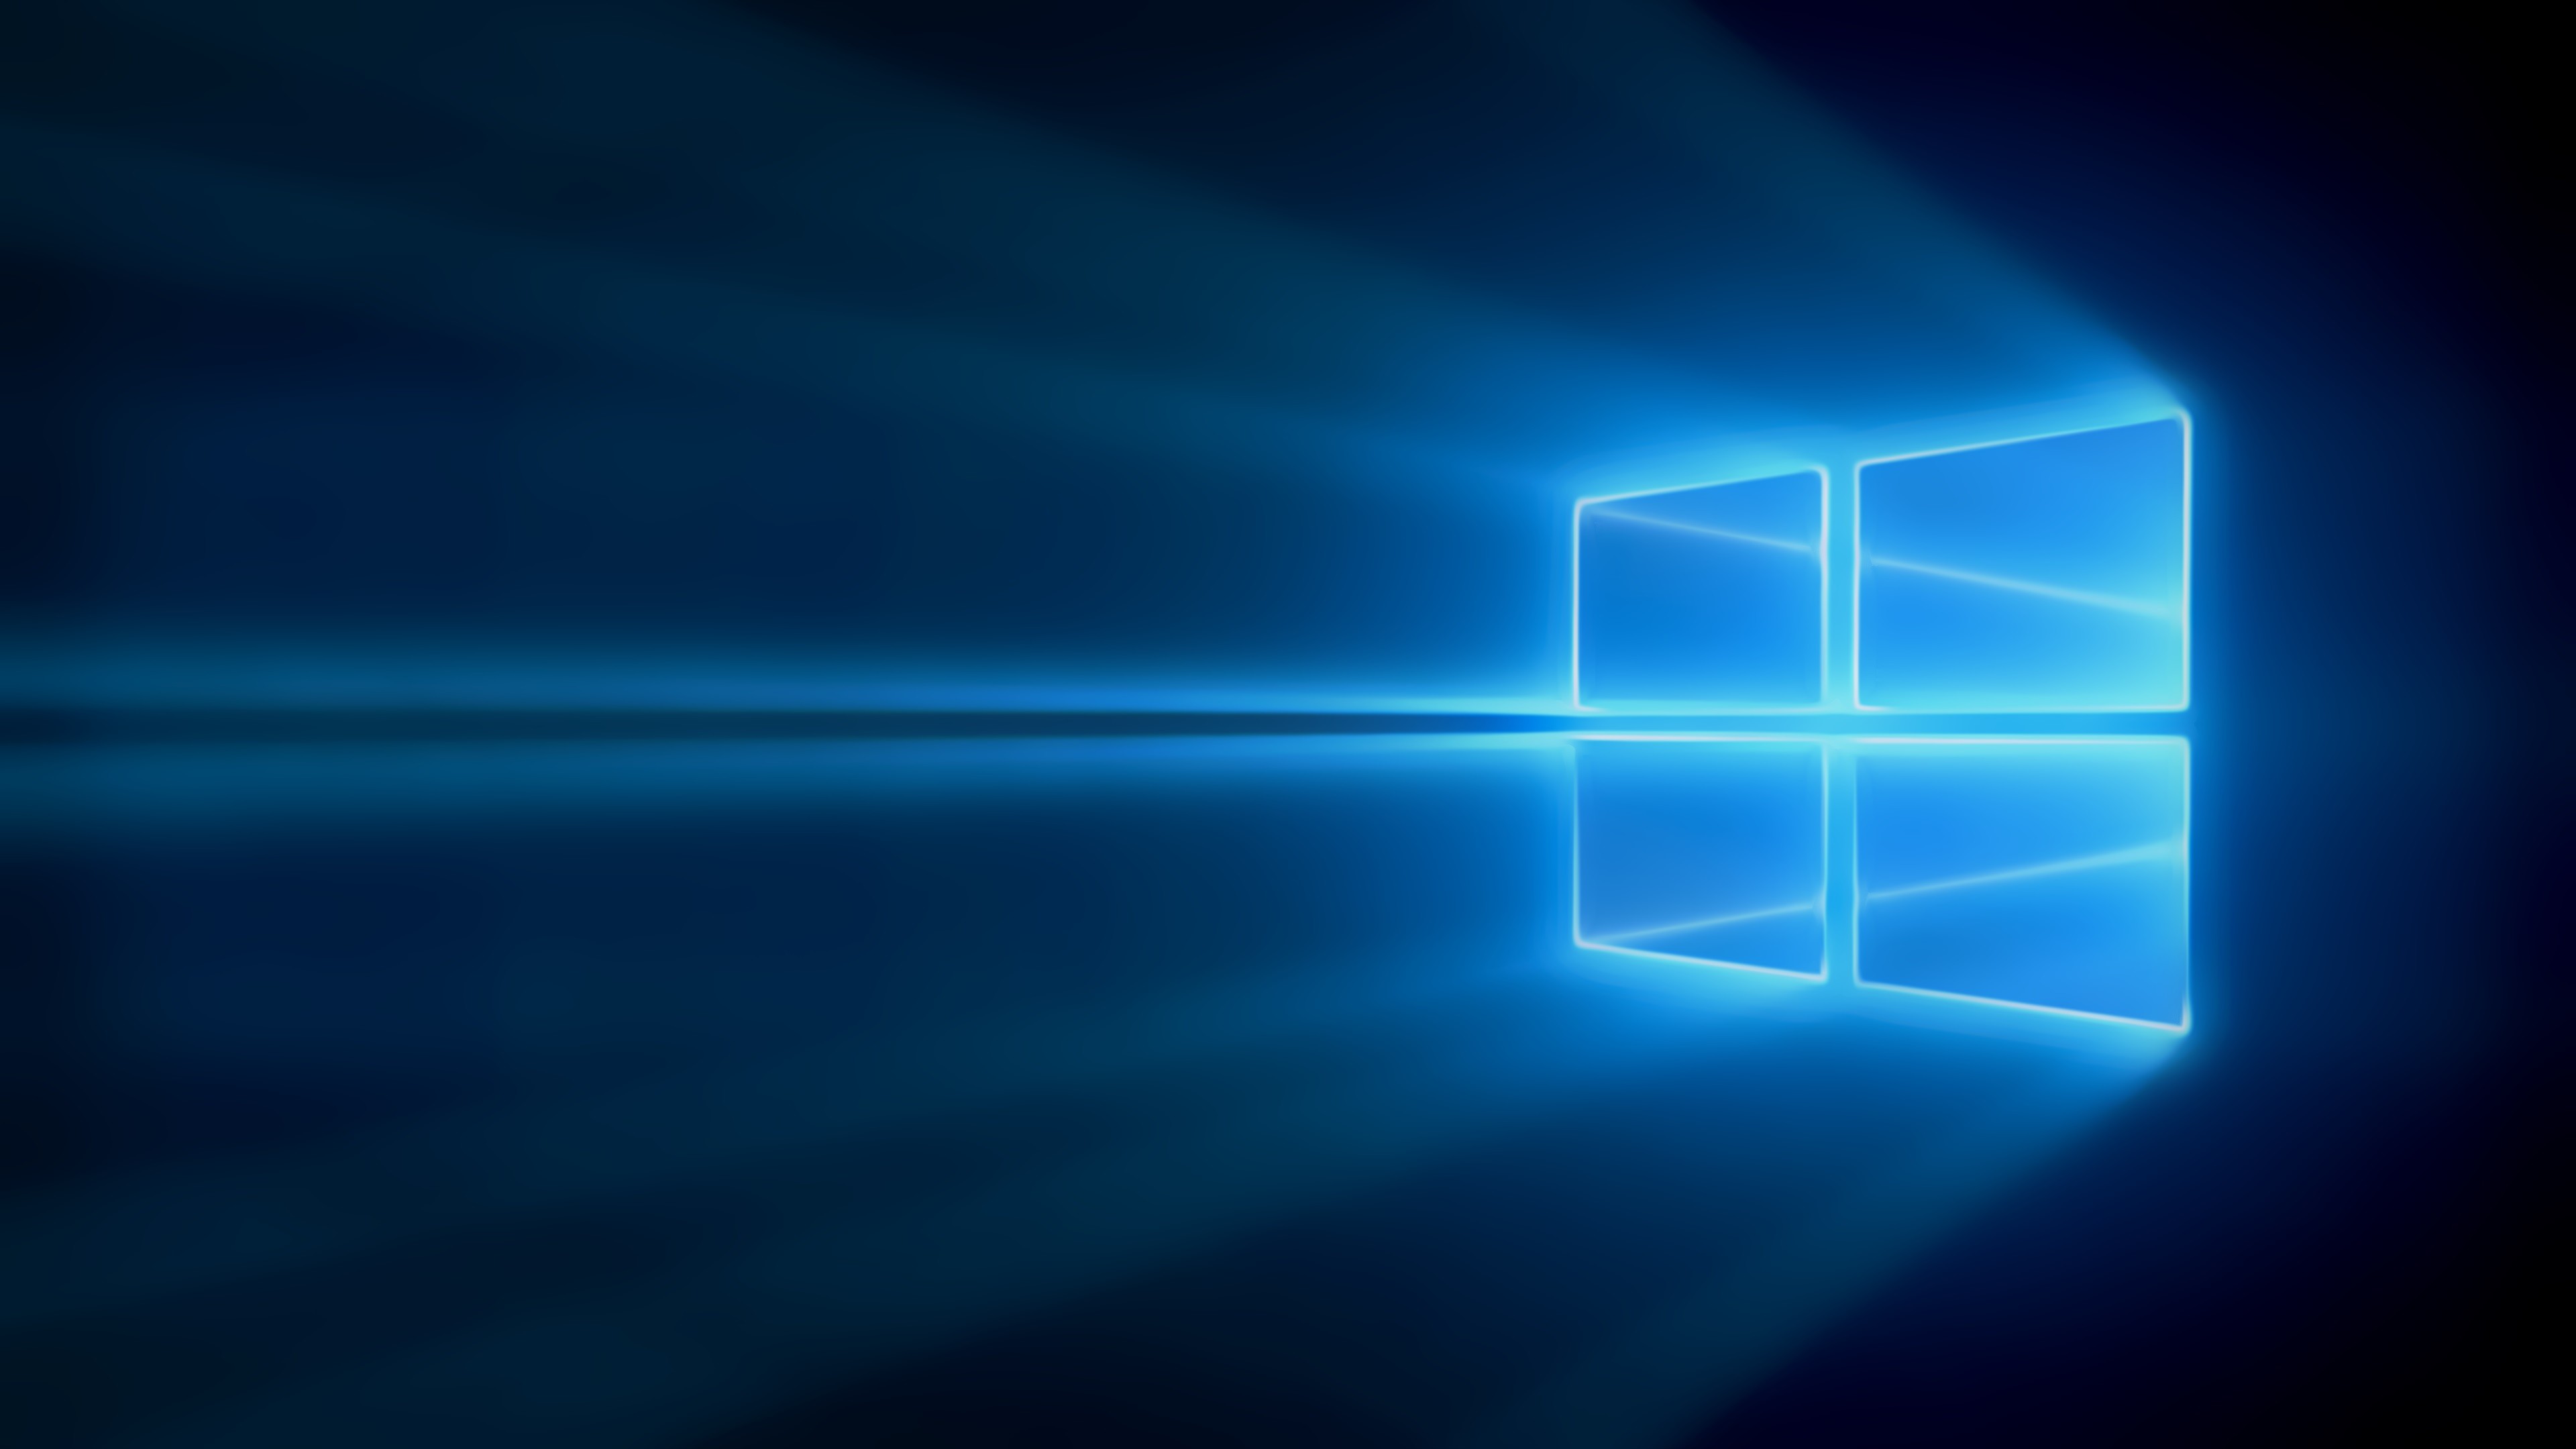  Effects Master Creates Downloadable Version of Windows 10 Wallpaper